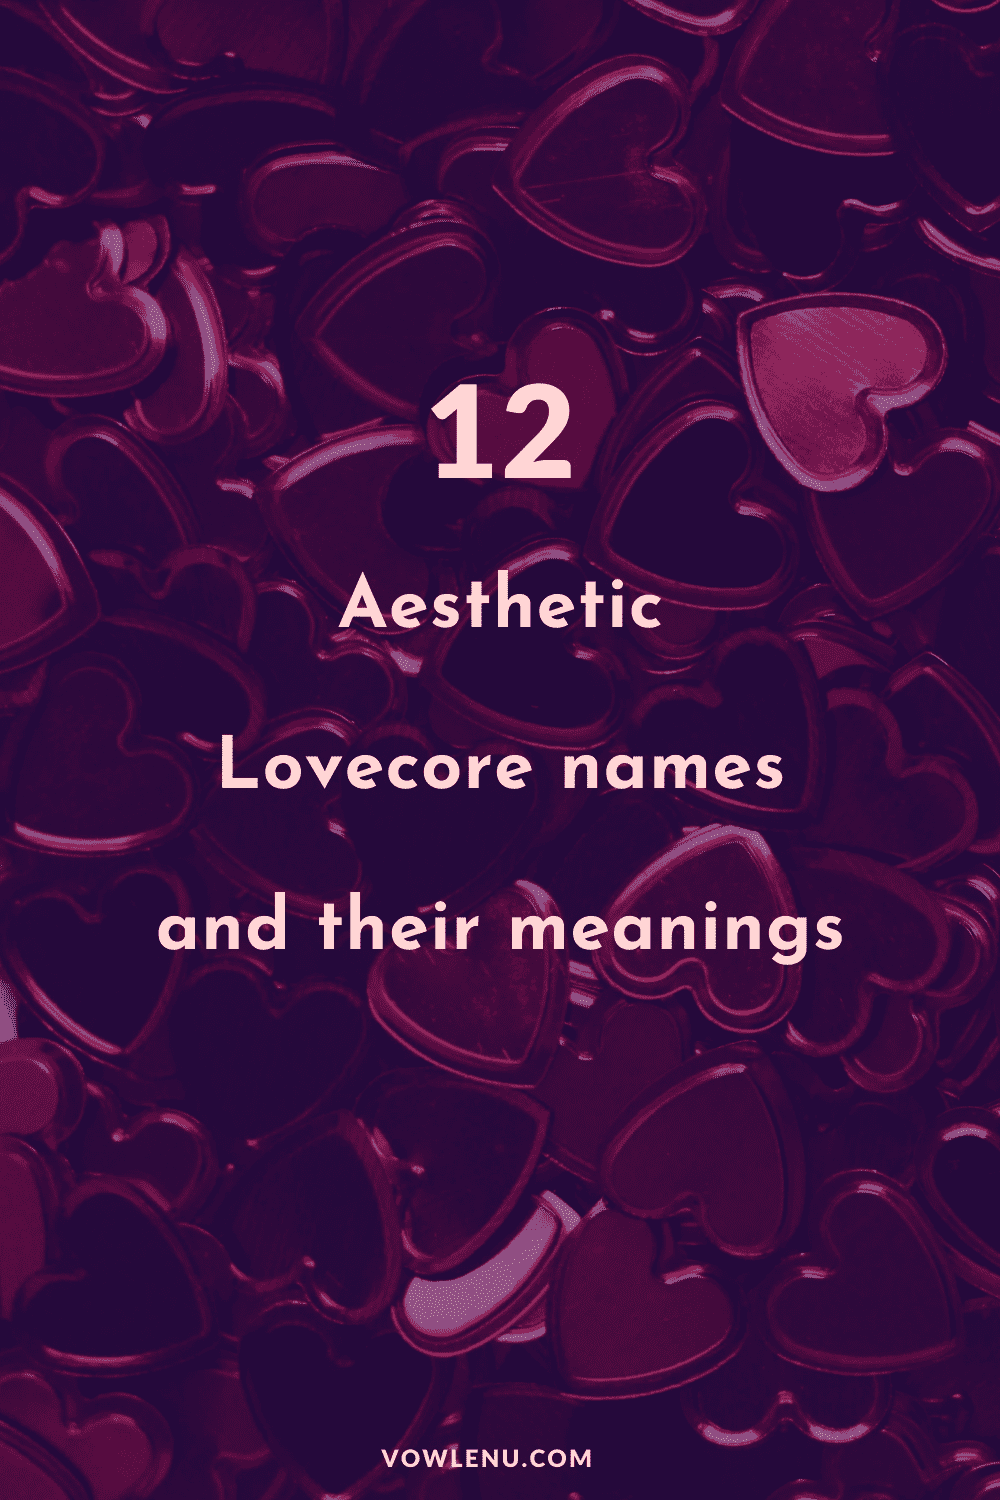 12 AESTHETIC LOVECORE NAMES AND THEIR MEANINGS